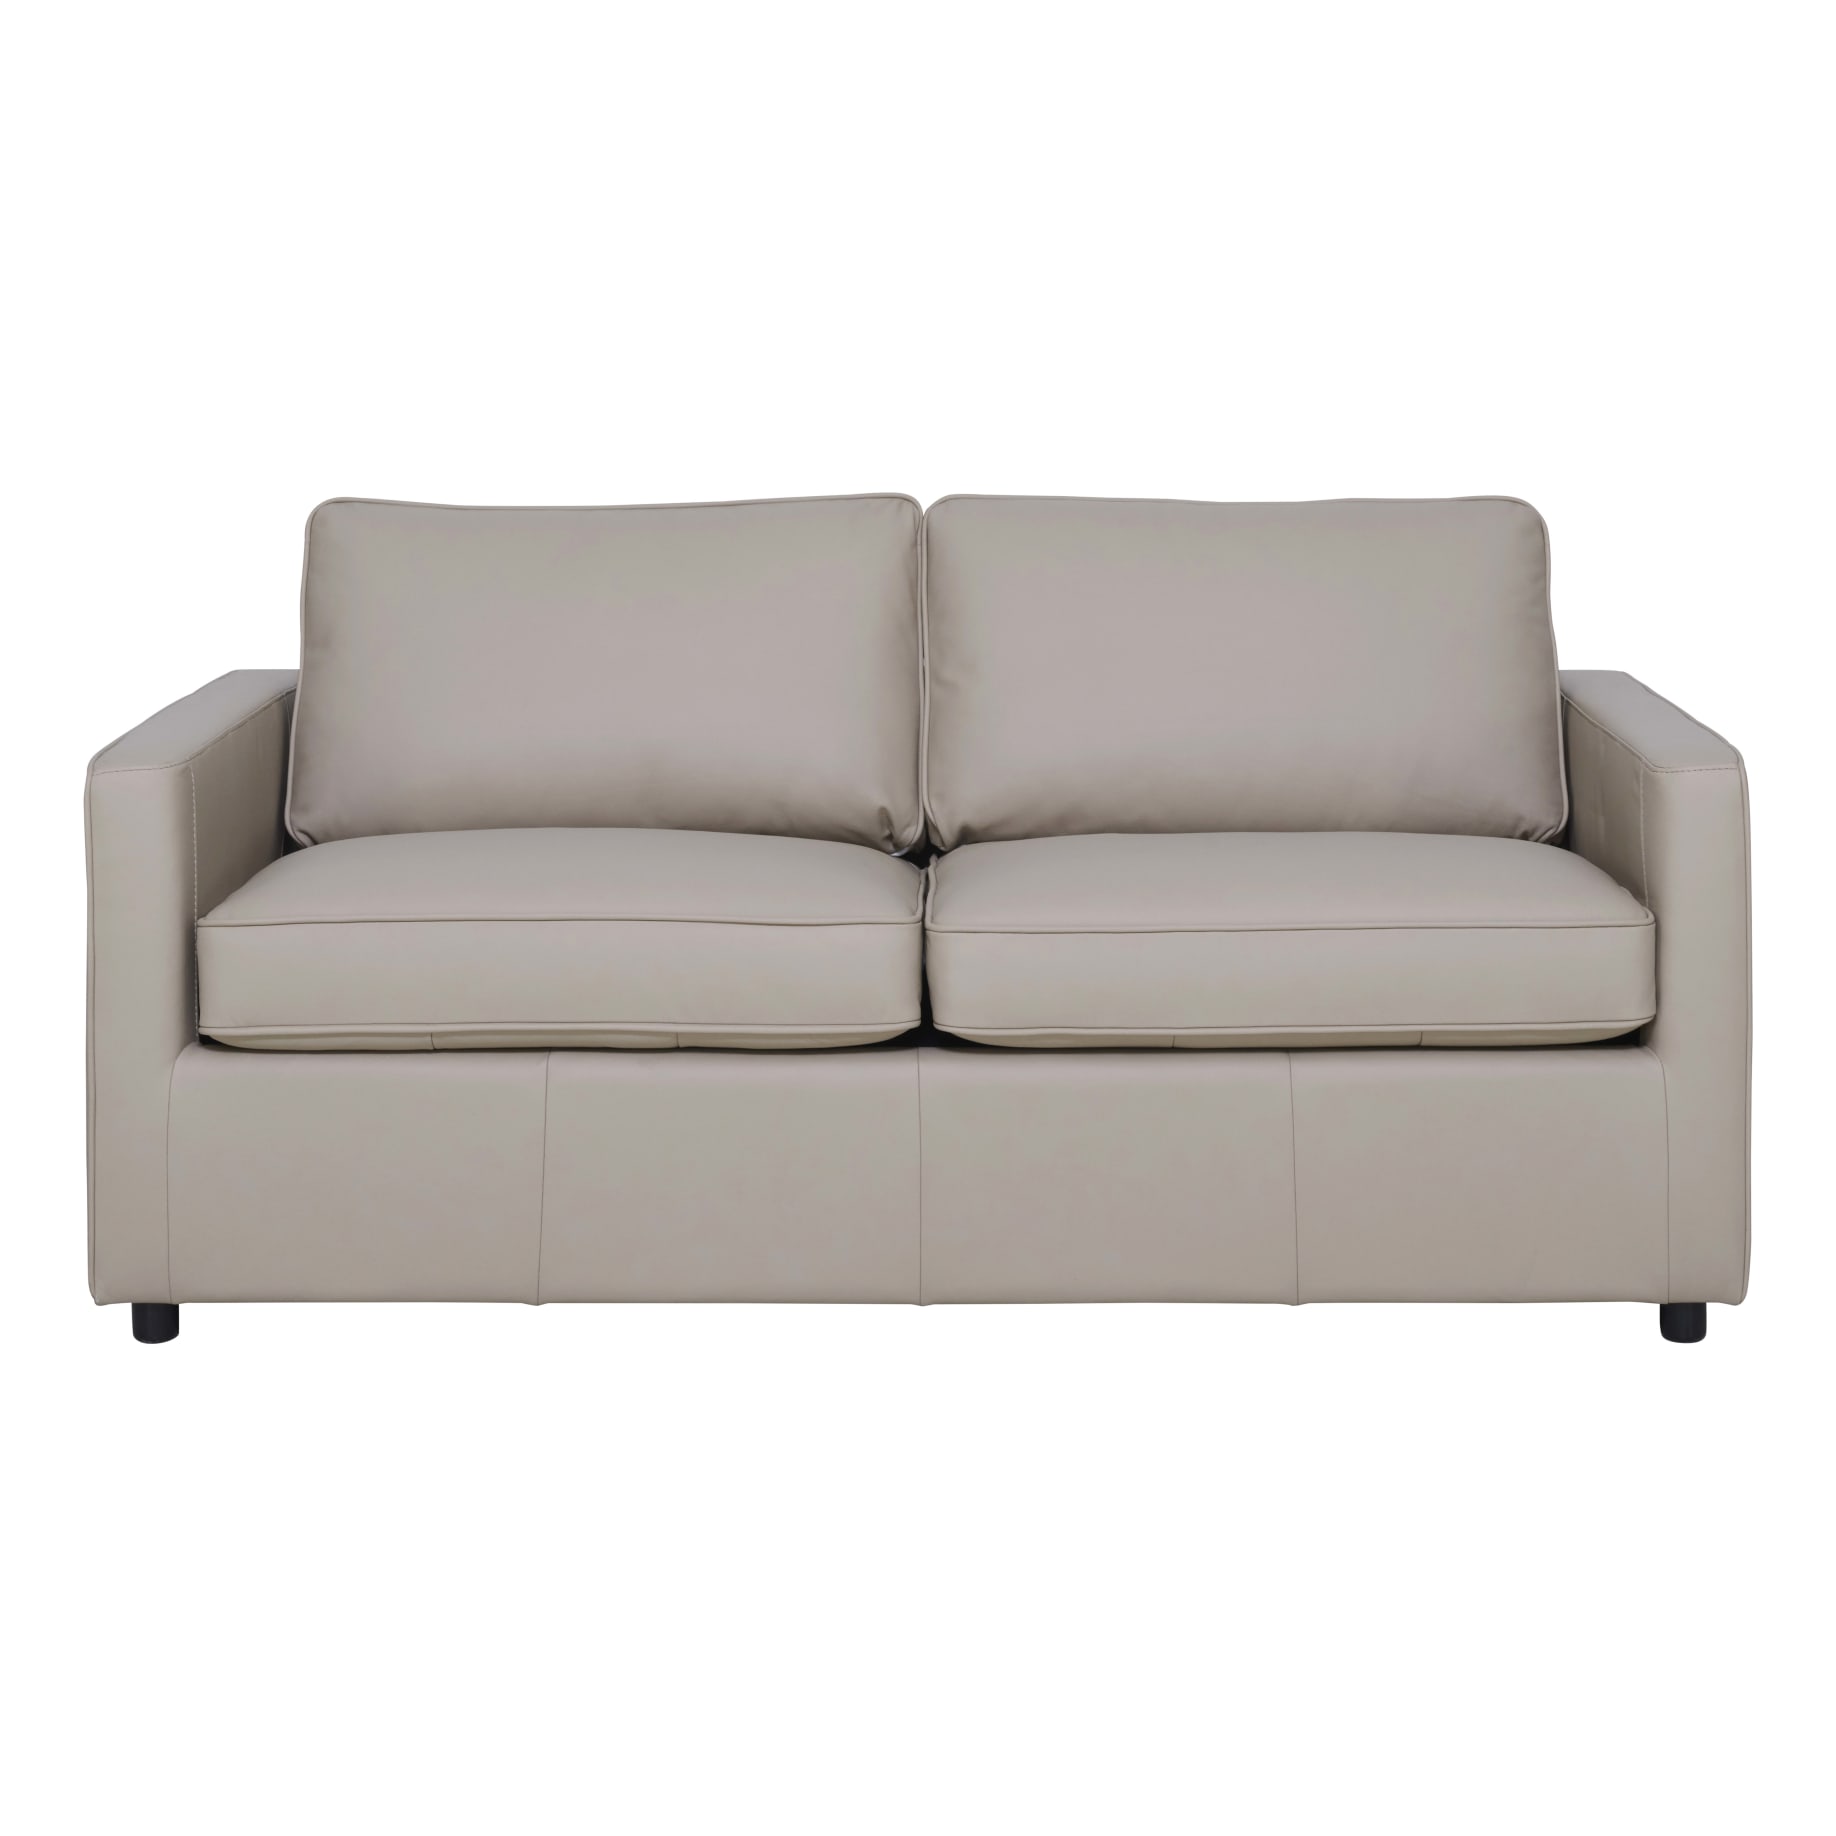 Ronin Sofabed in Leather Light Mocha